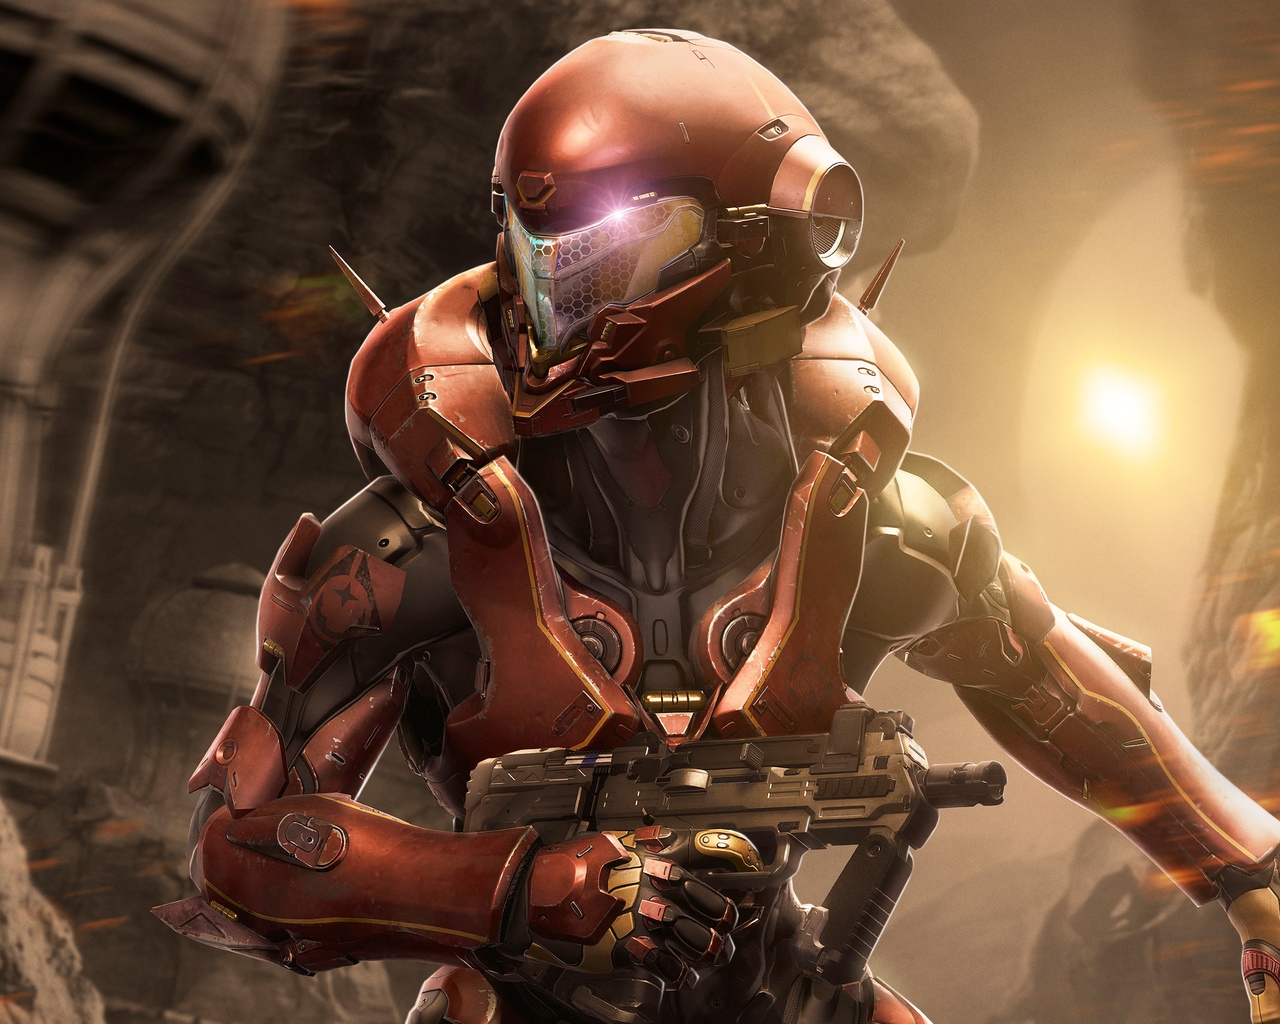 Halo 5 Soldier for 1280 x 1024 resolution